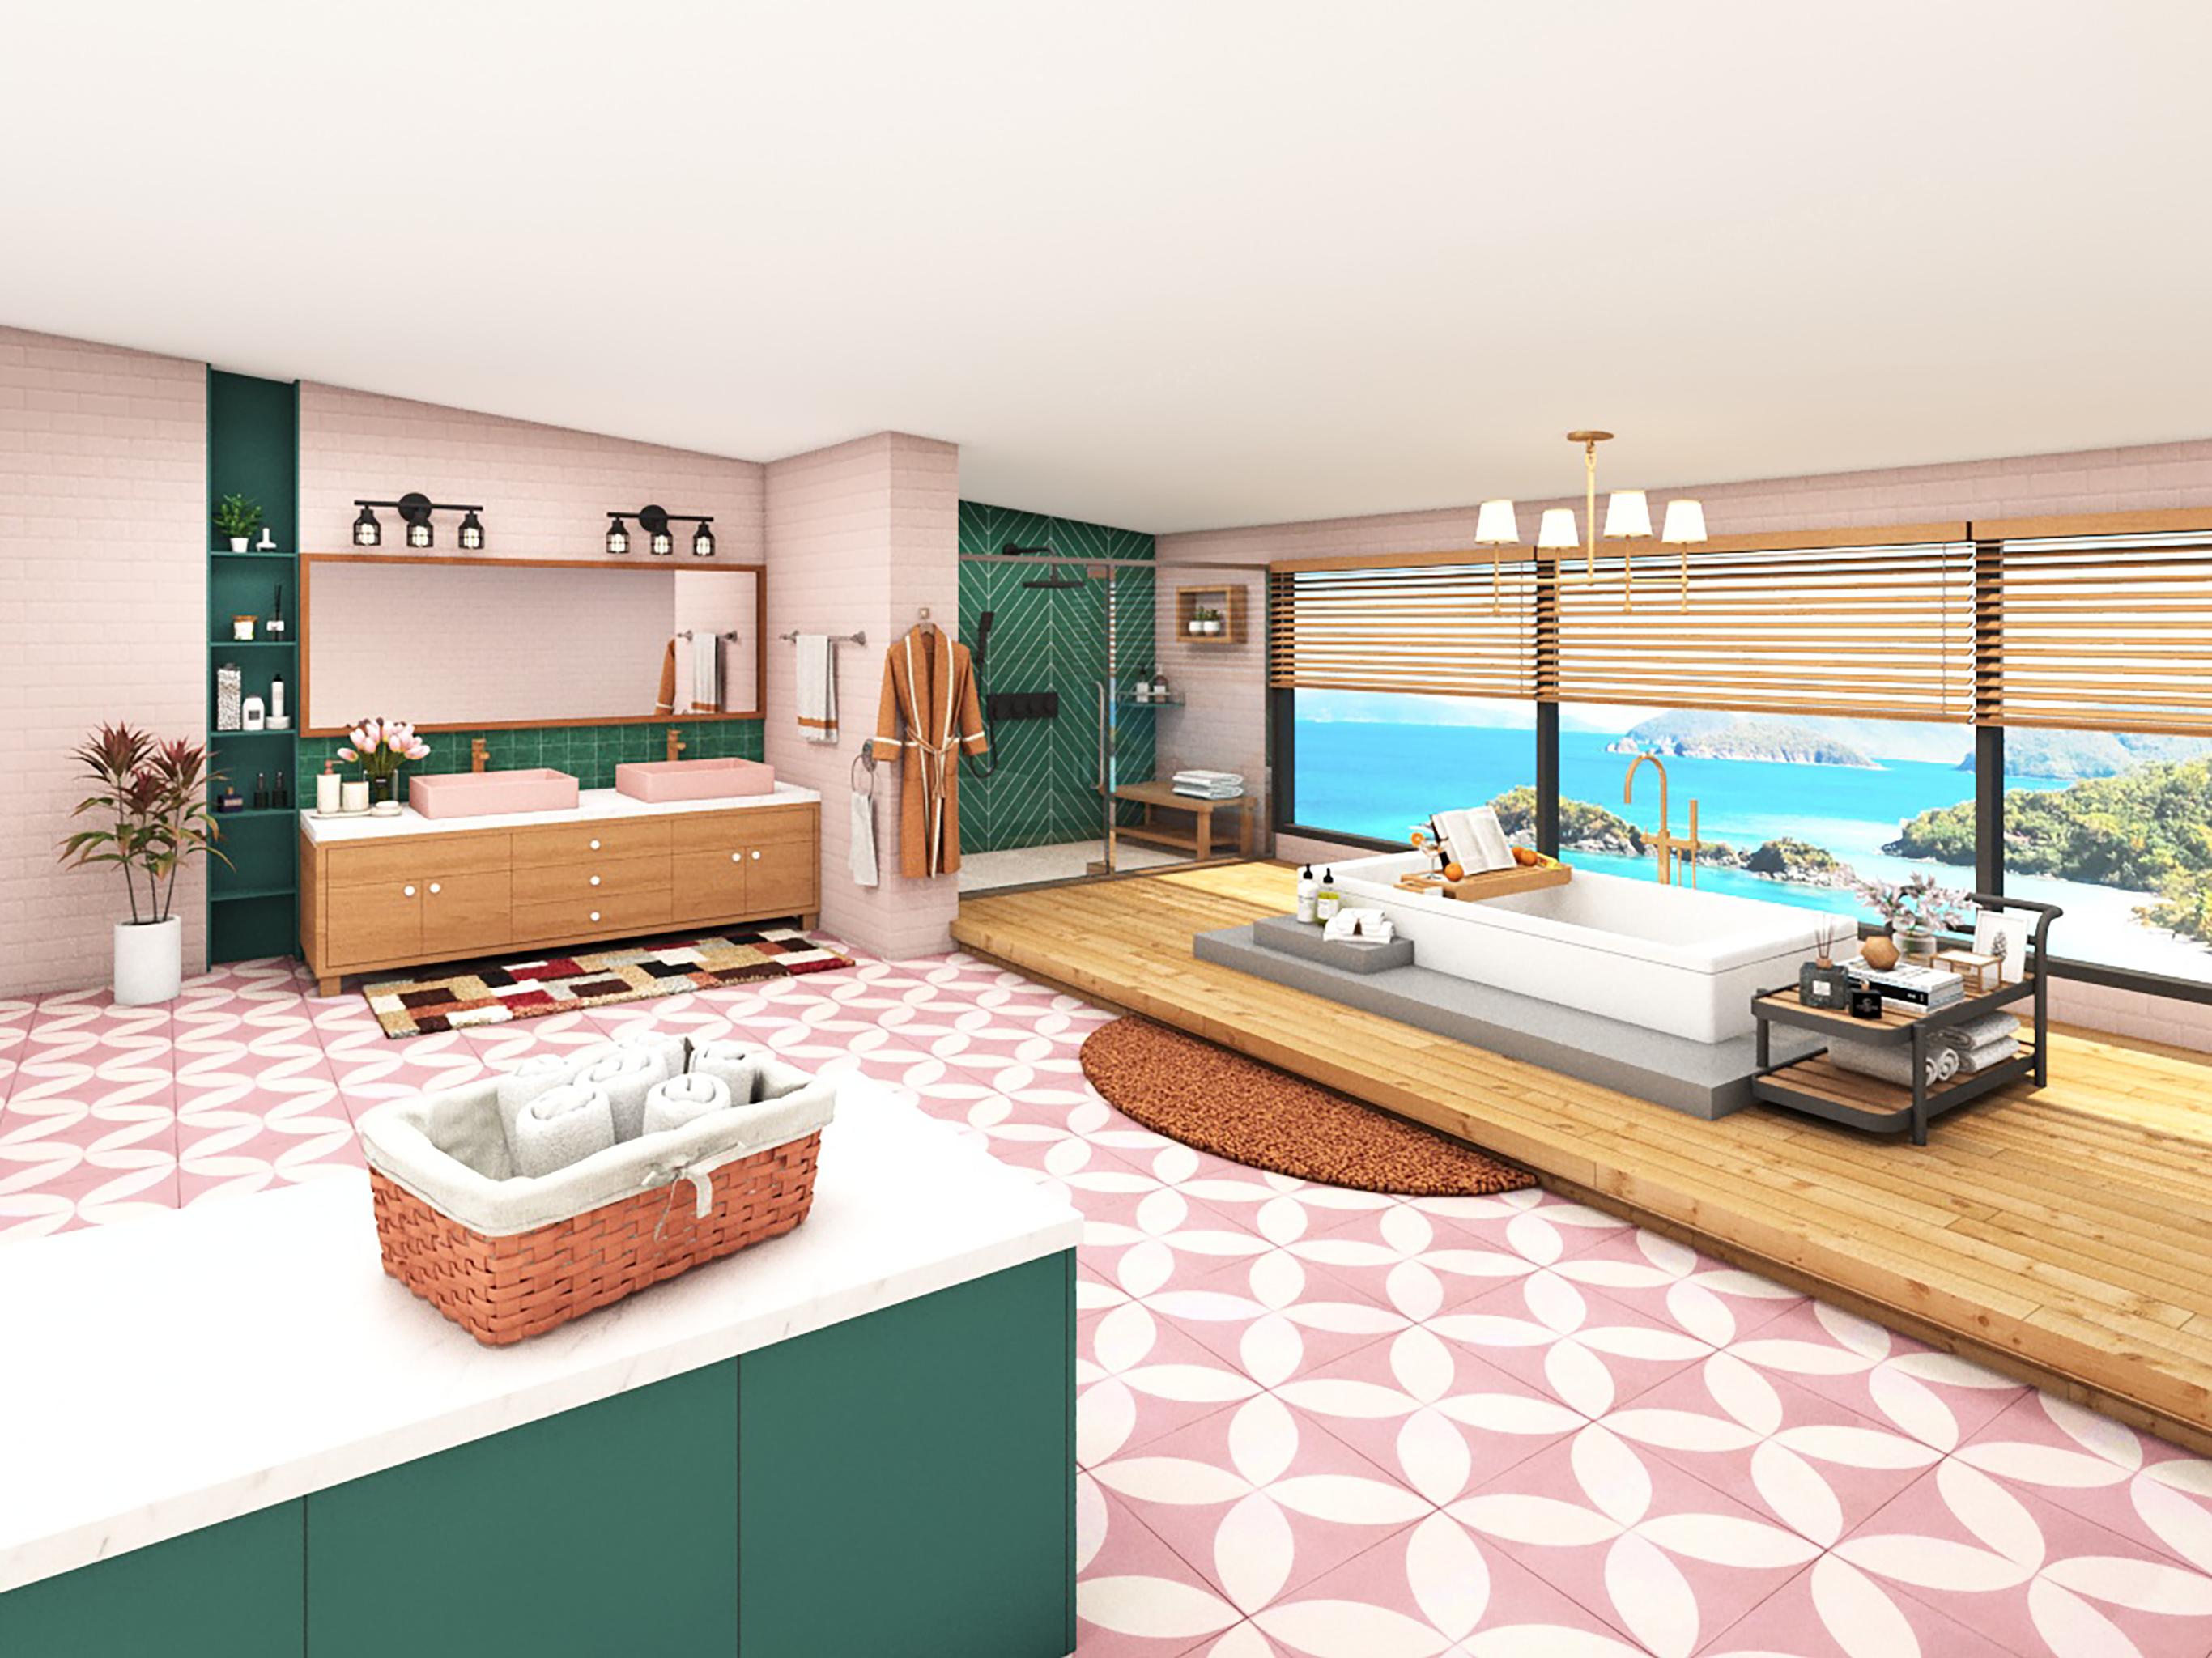 Home Design Paradise Life For Android Apk Download